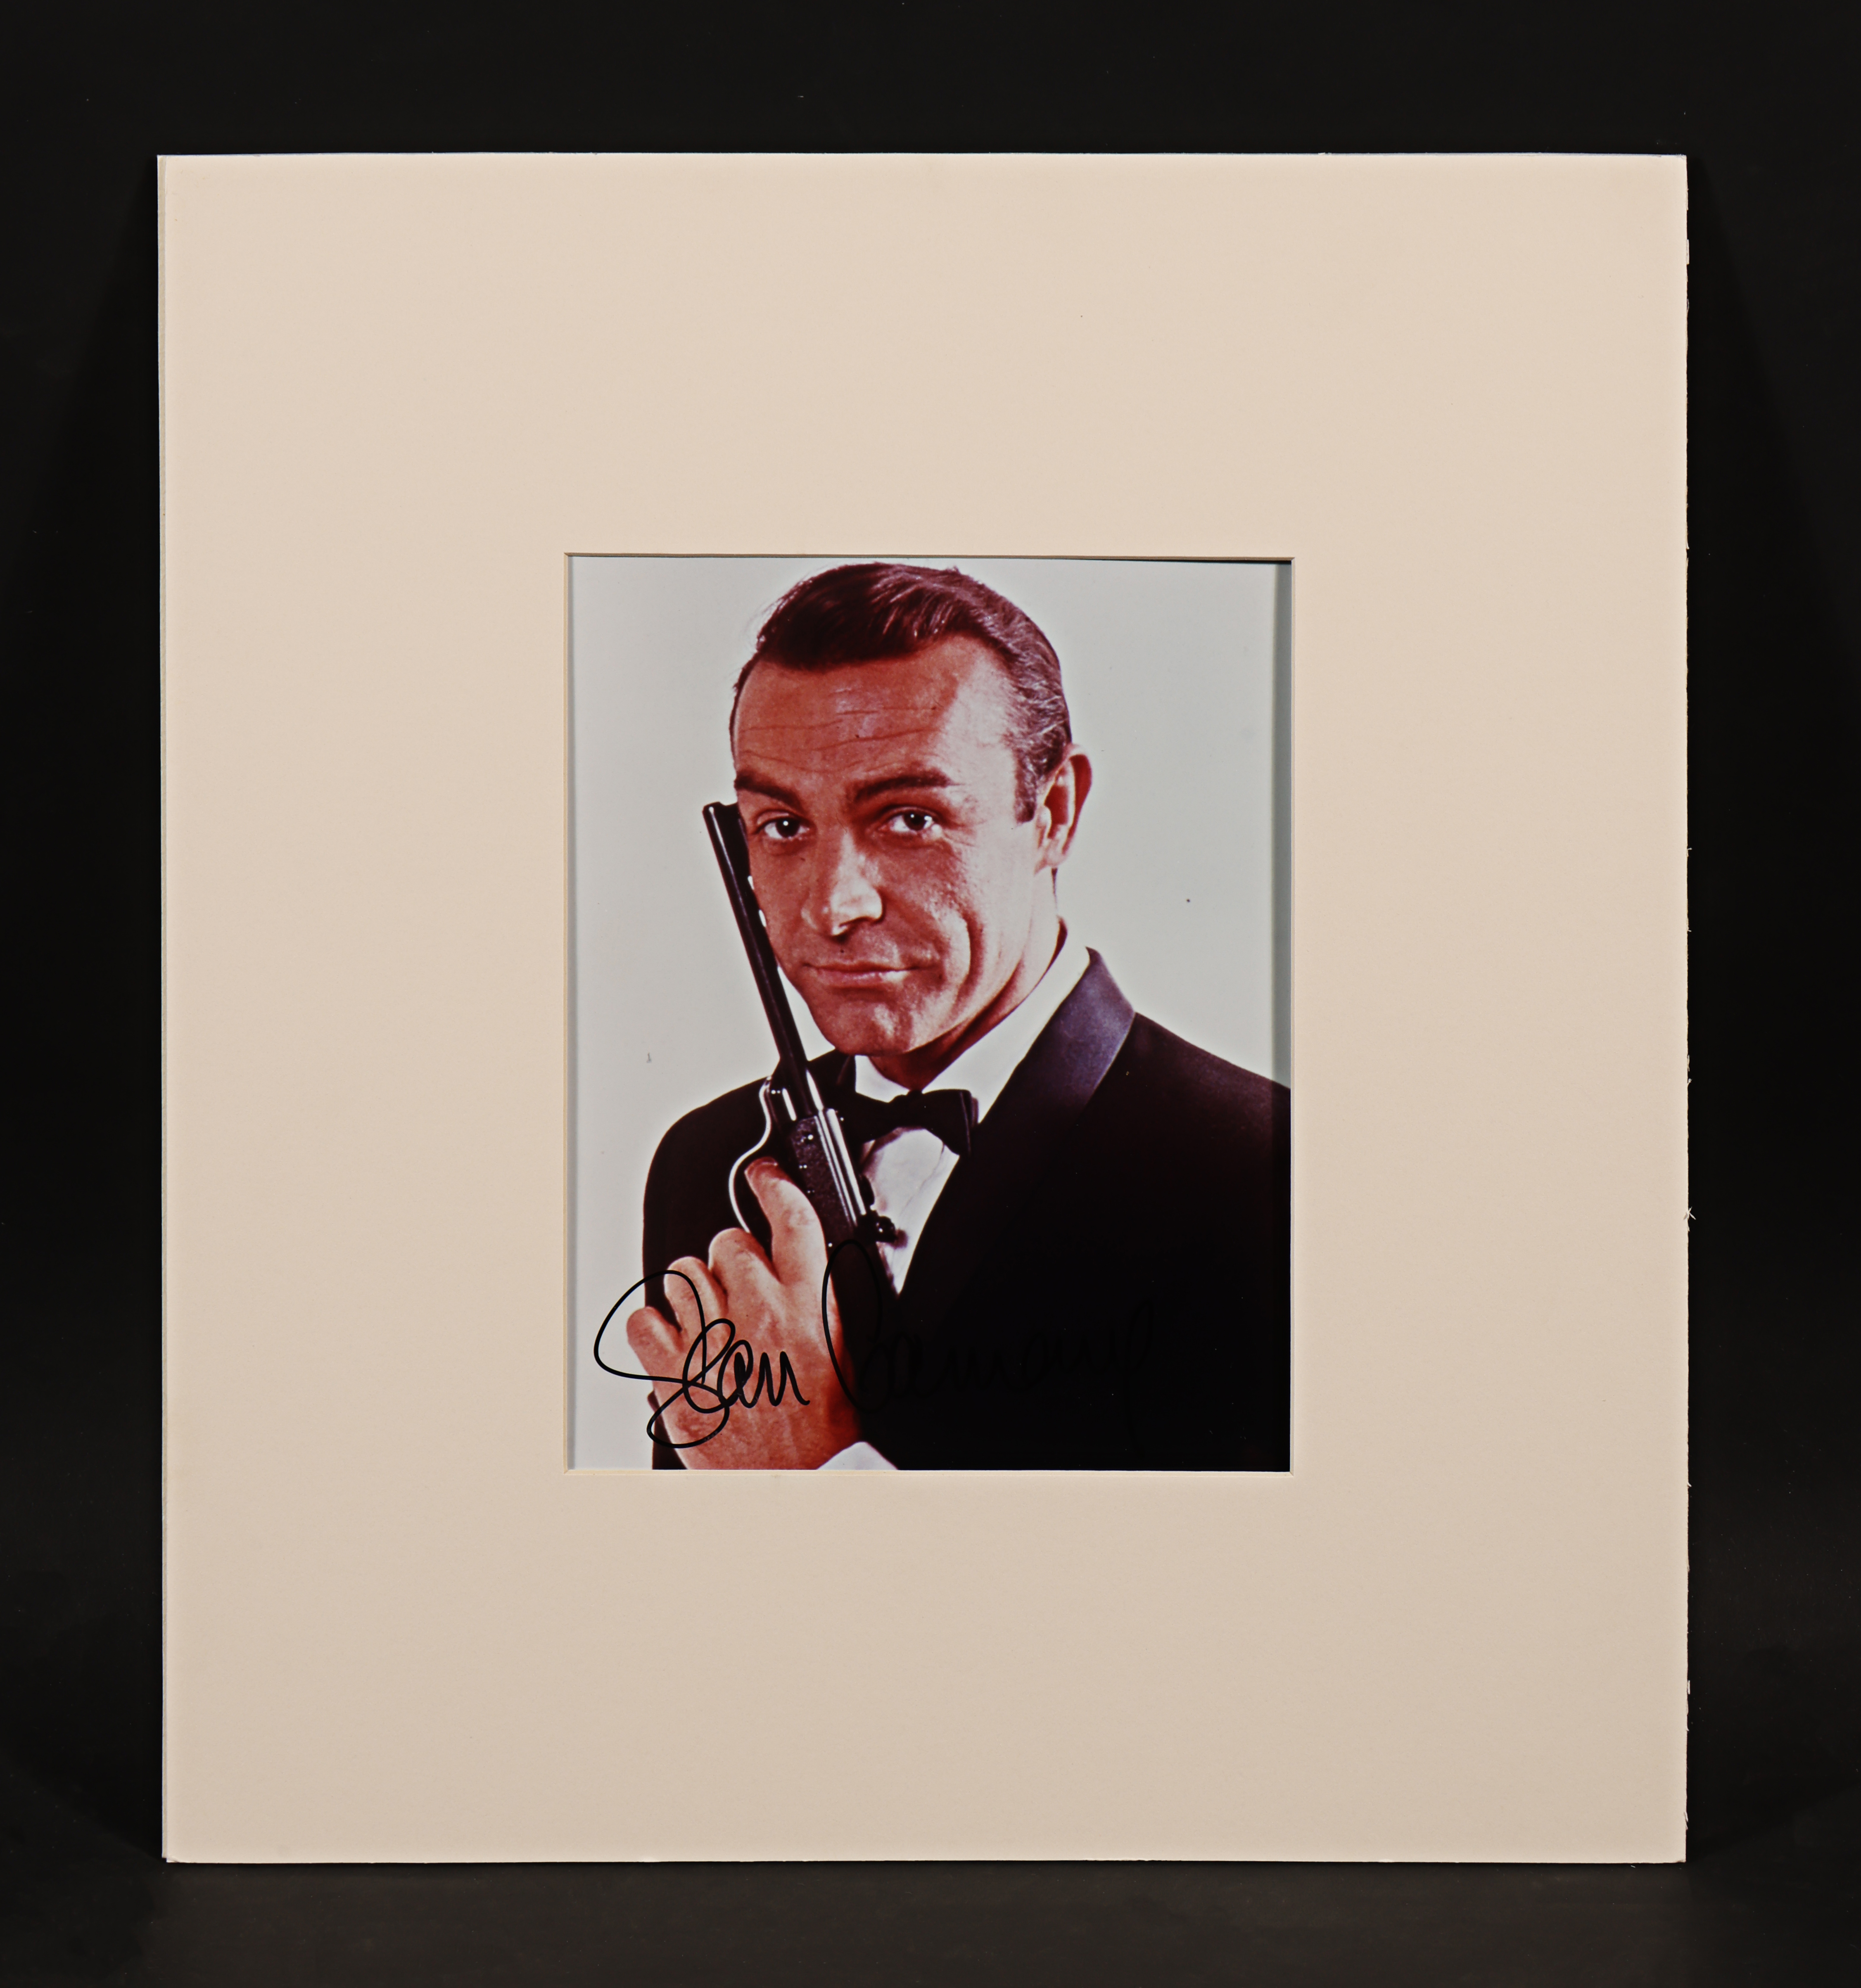 JAMES BOND: SEAN CONNERY - Sean Connery Autographed Still